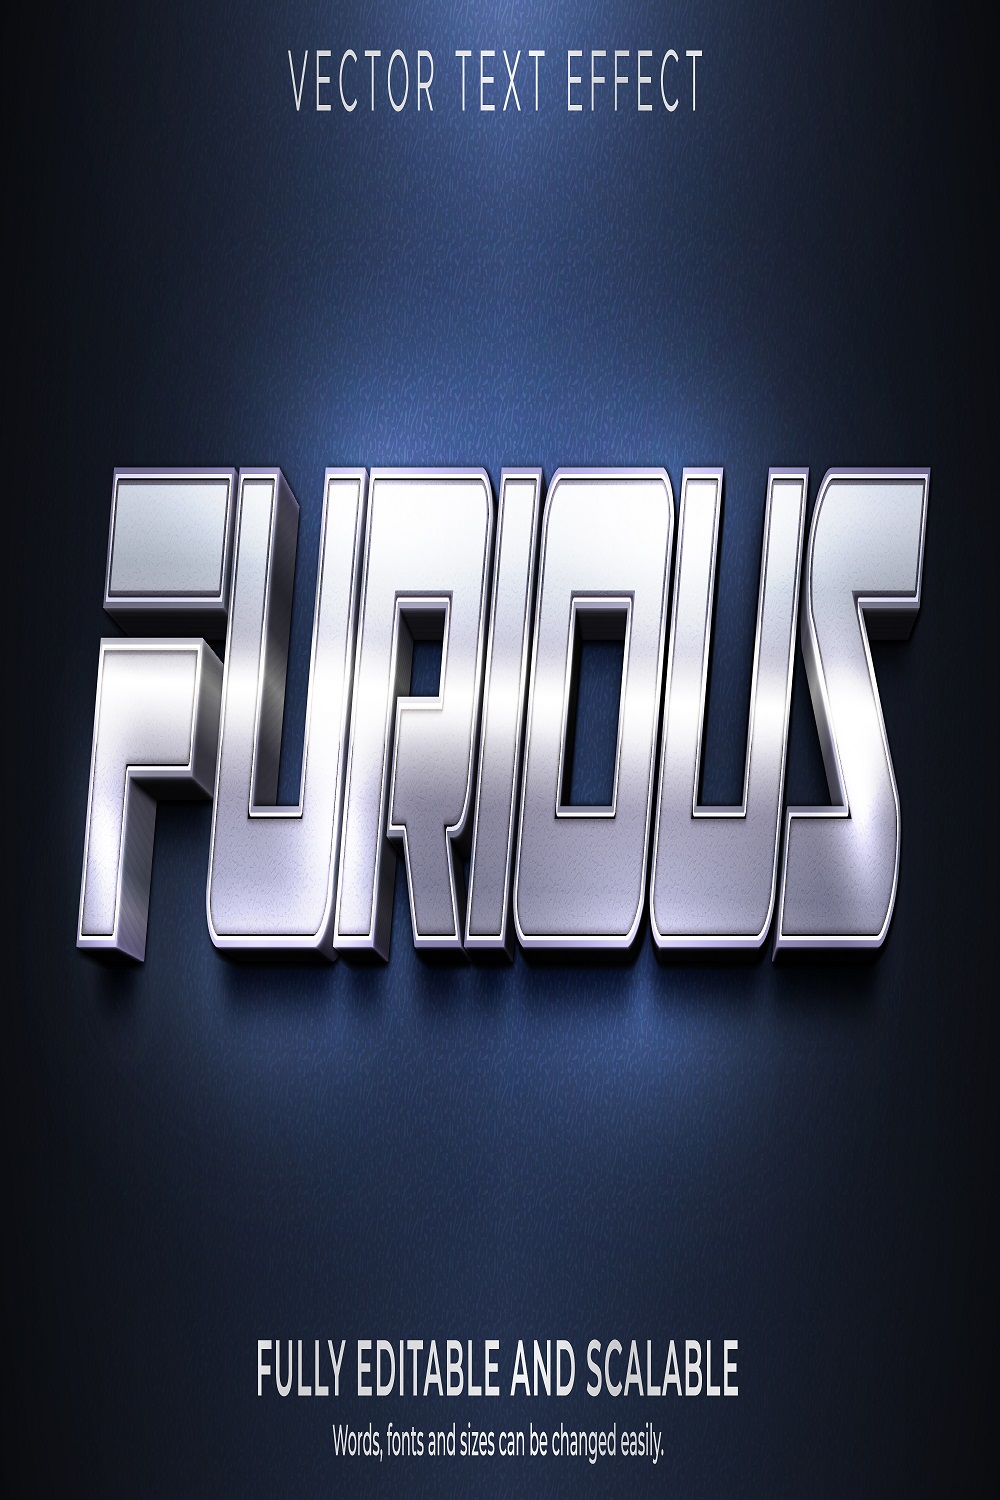 Furious editable text effect metallic shiny text style pinterest preview image.